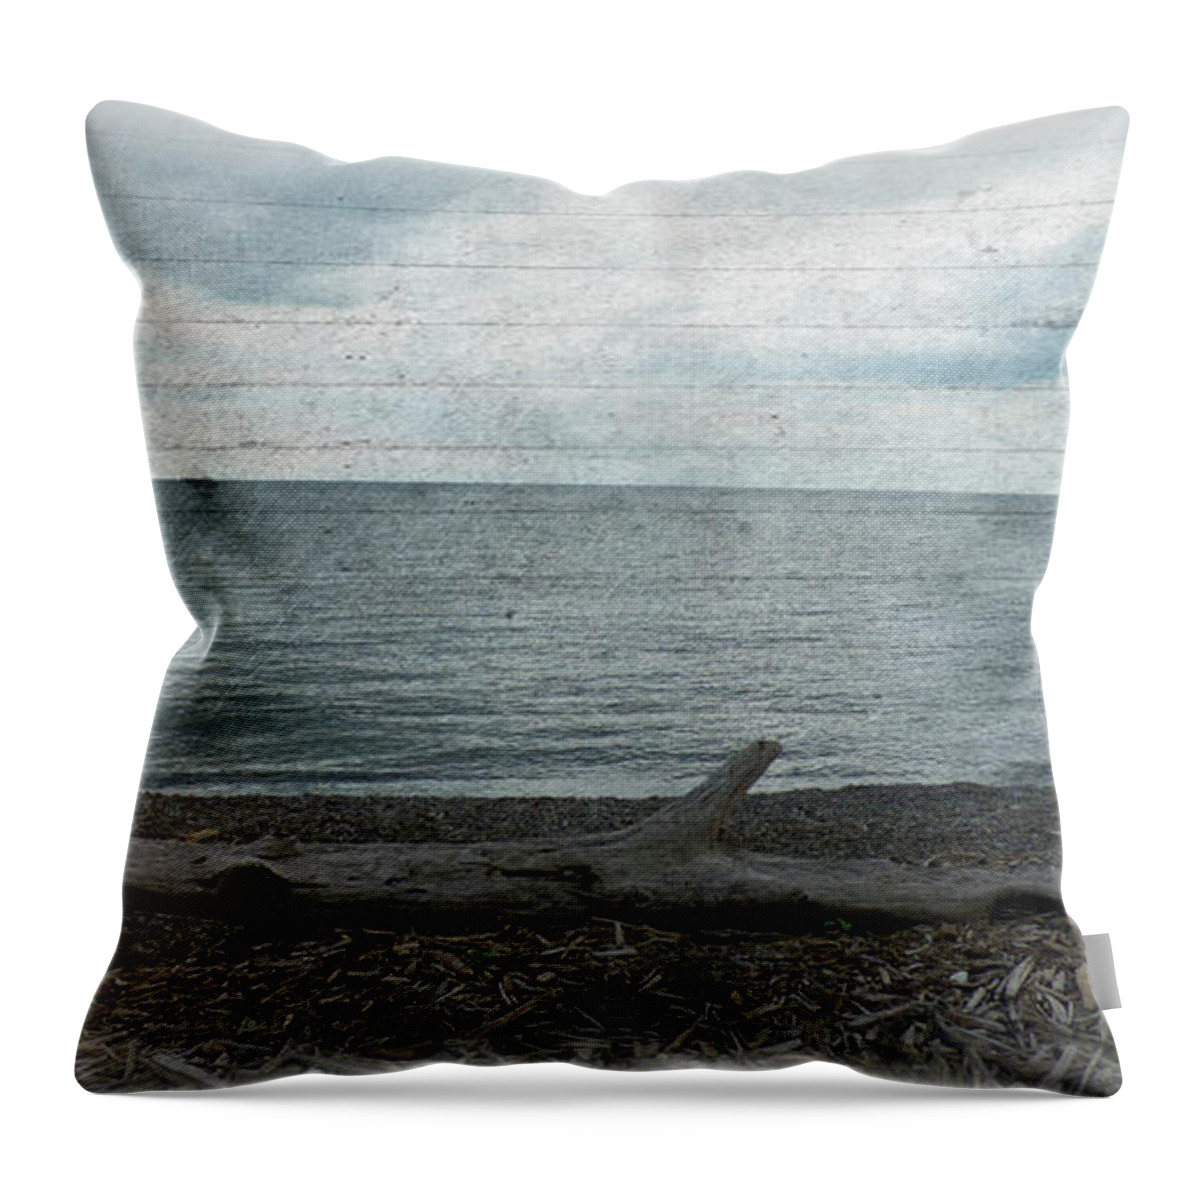 Lake Ontario Throw Pillow featuring the photograph South Shore by Leslie Montgomery